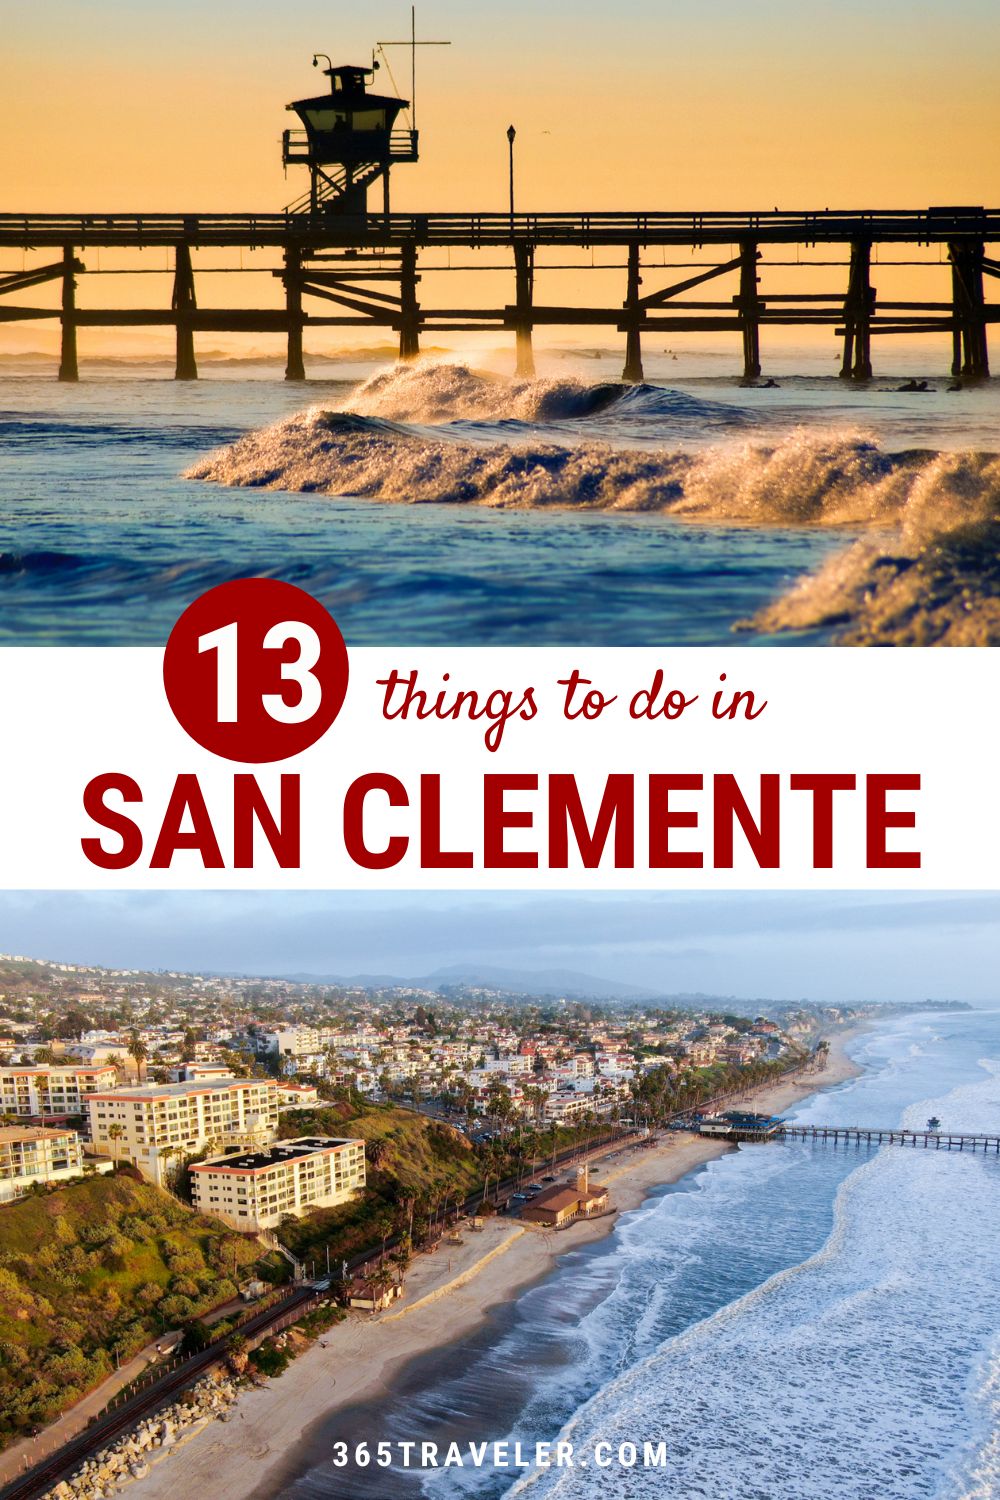 13 SPECTACULAR THINGS TO DO IN SAN CLEMENTE, CA